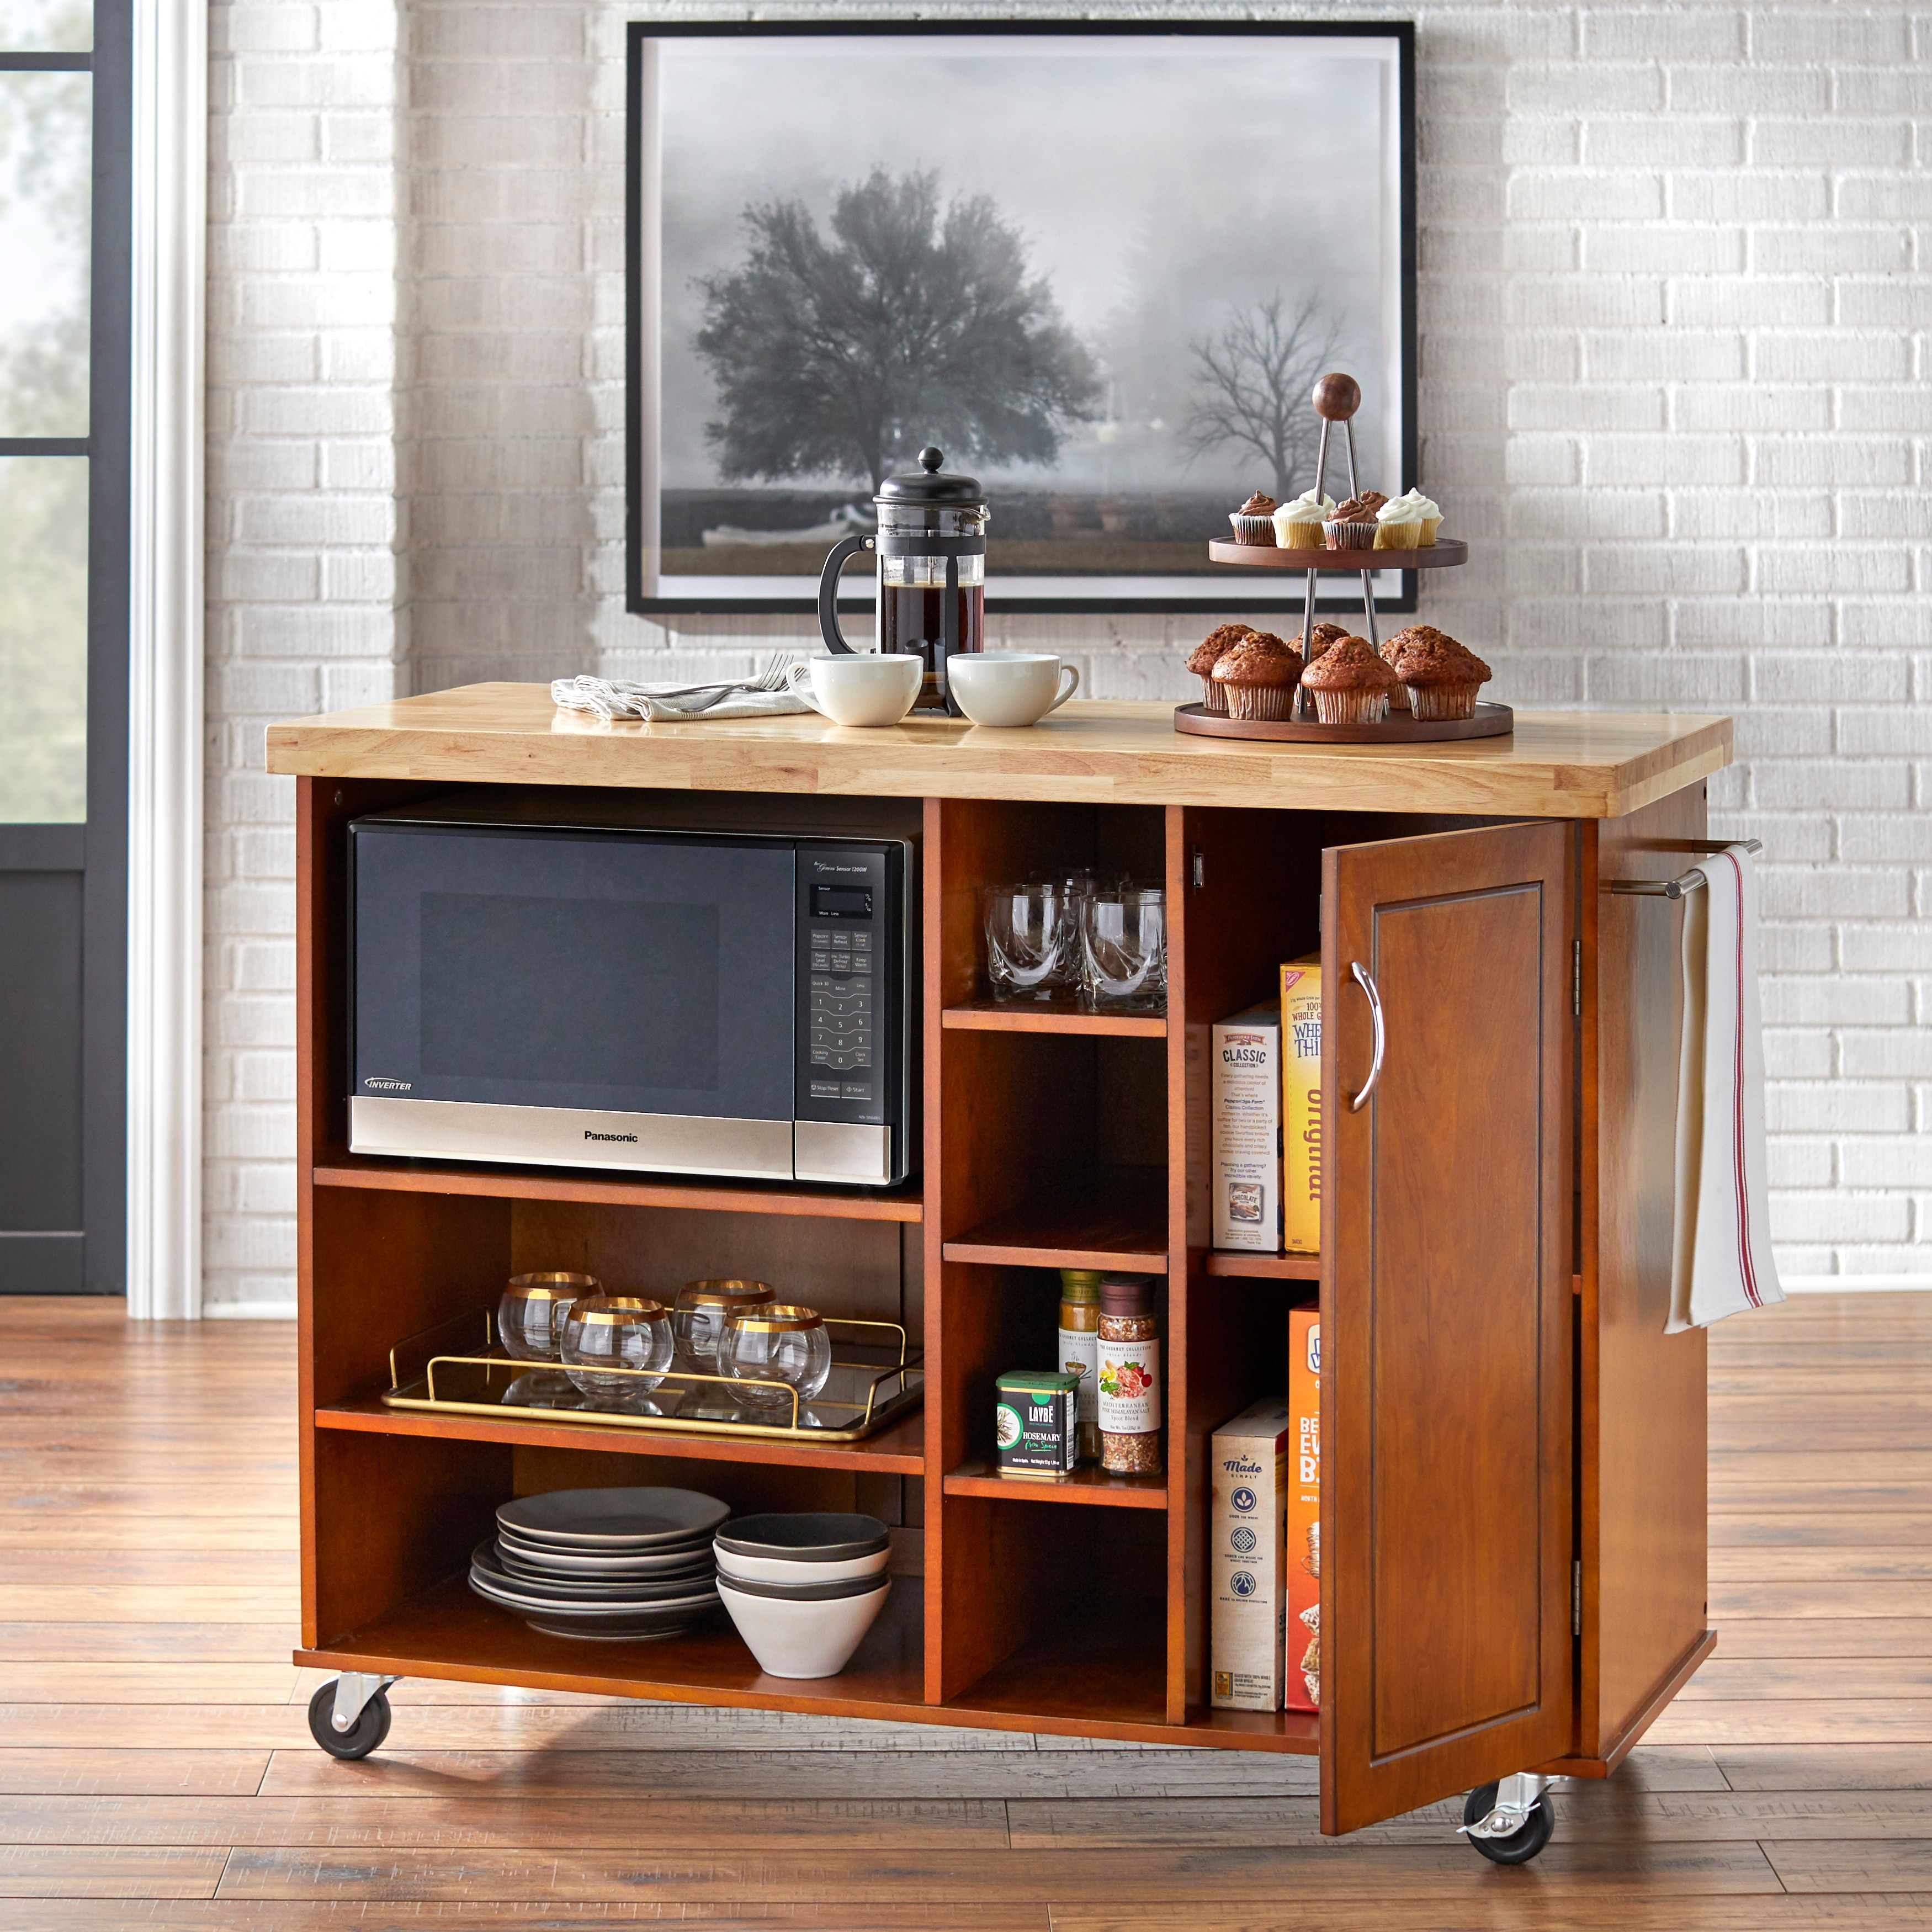 TMS Galvin Butcher Block Rolling Kitchen Cart with Microwave Cabinet, Shelves, and Towel Rack, Walnut - image 3 of 7